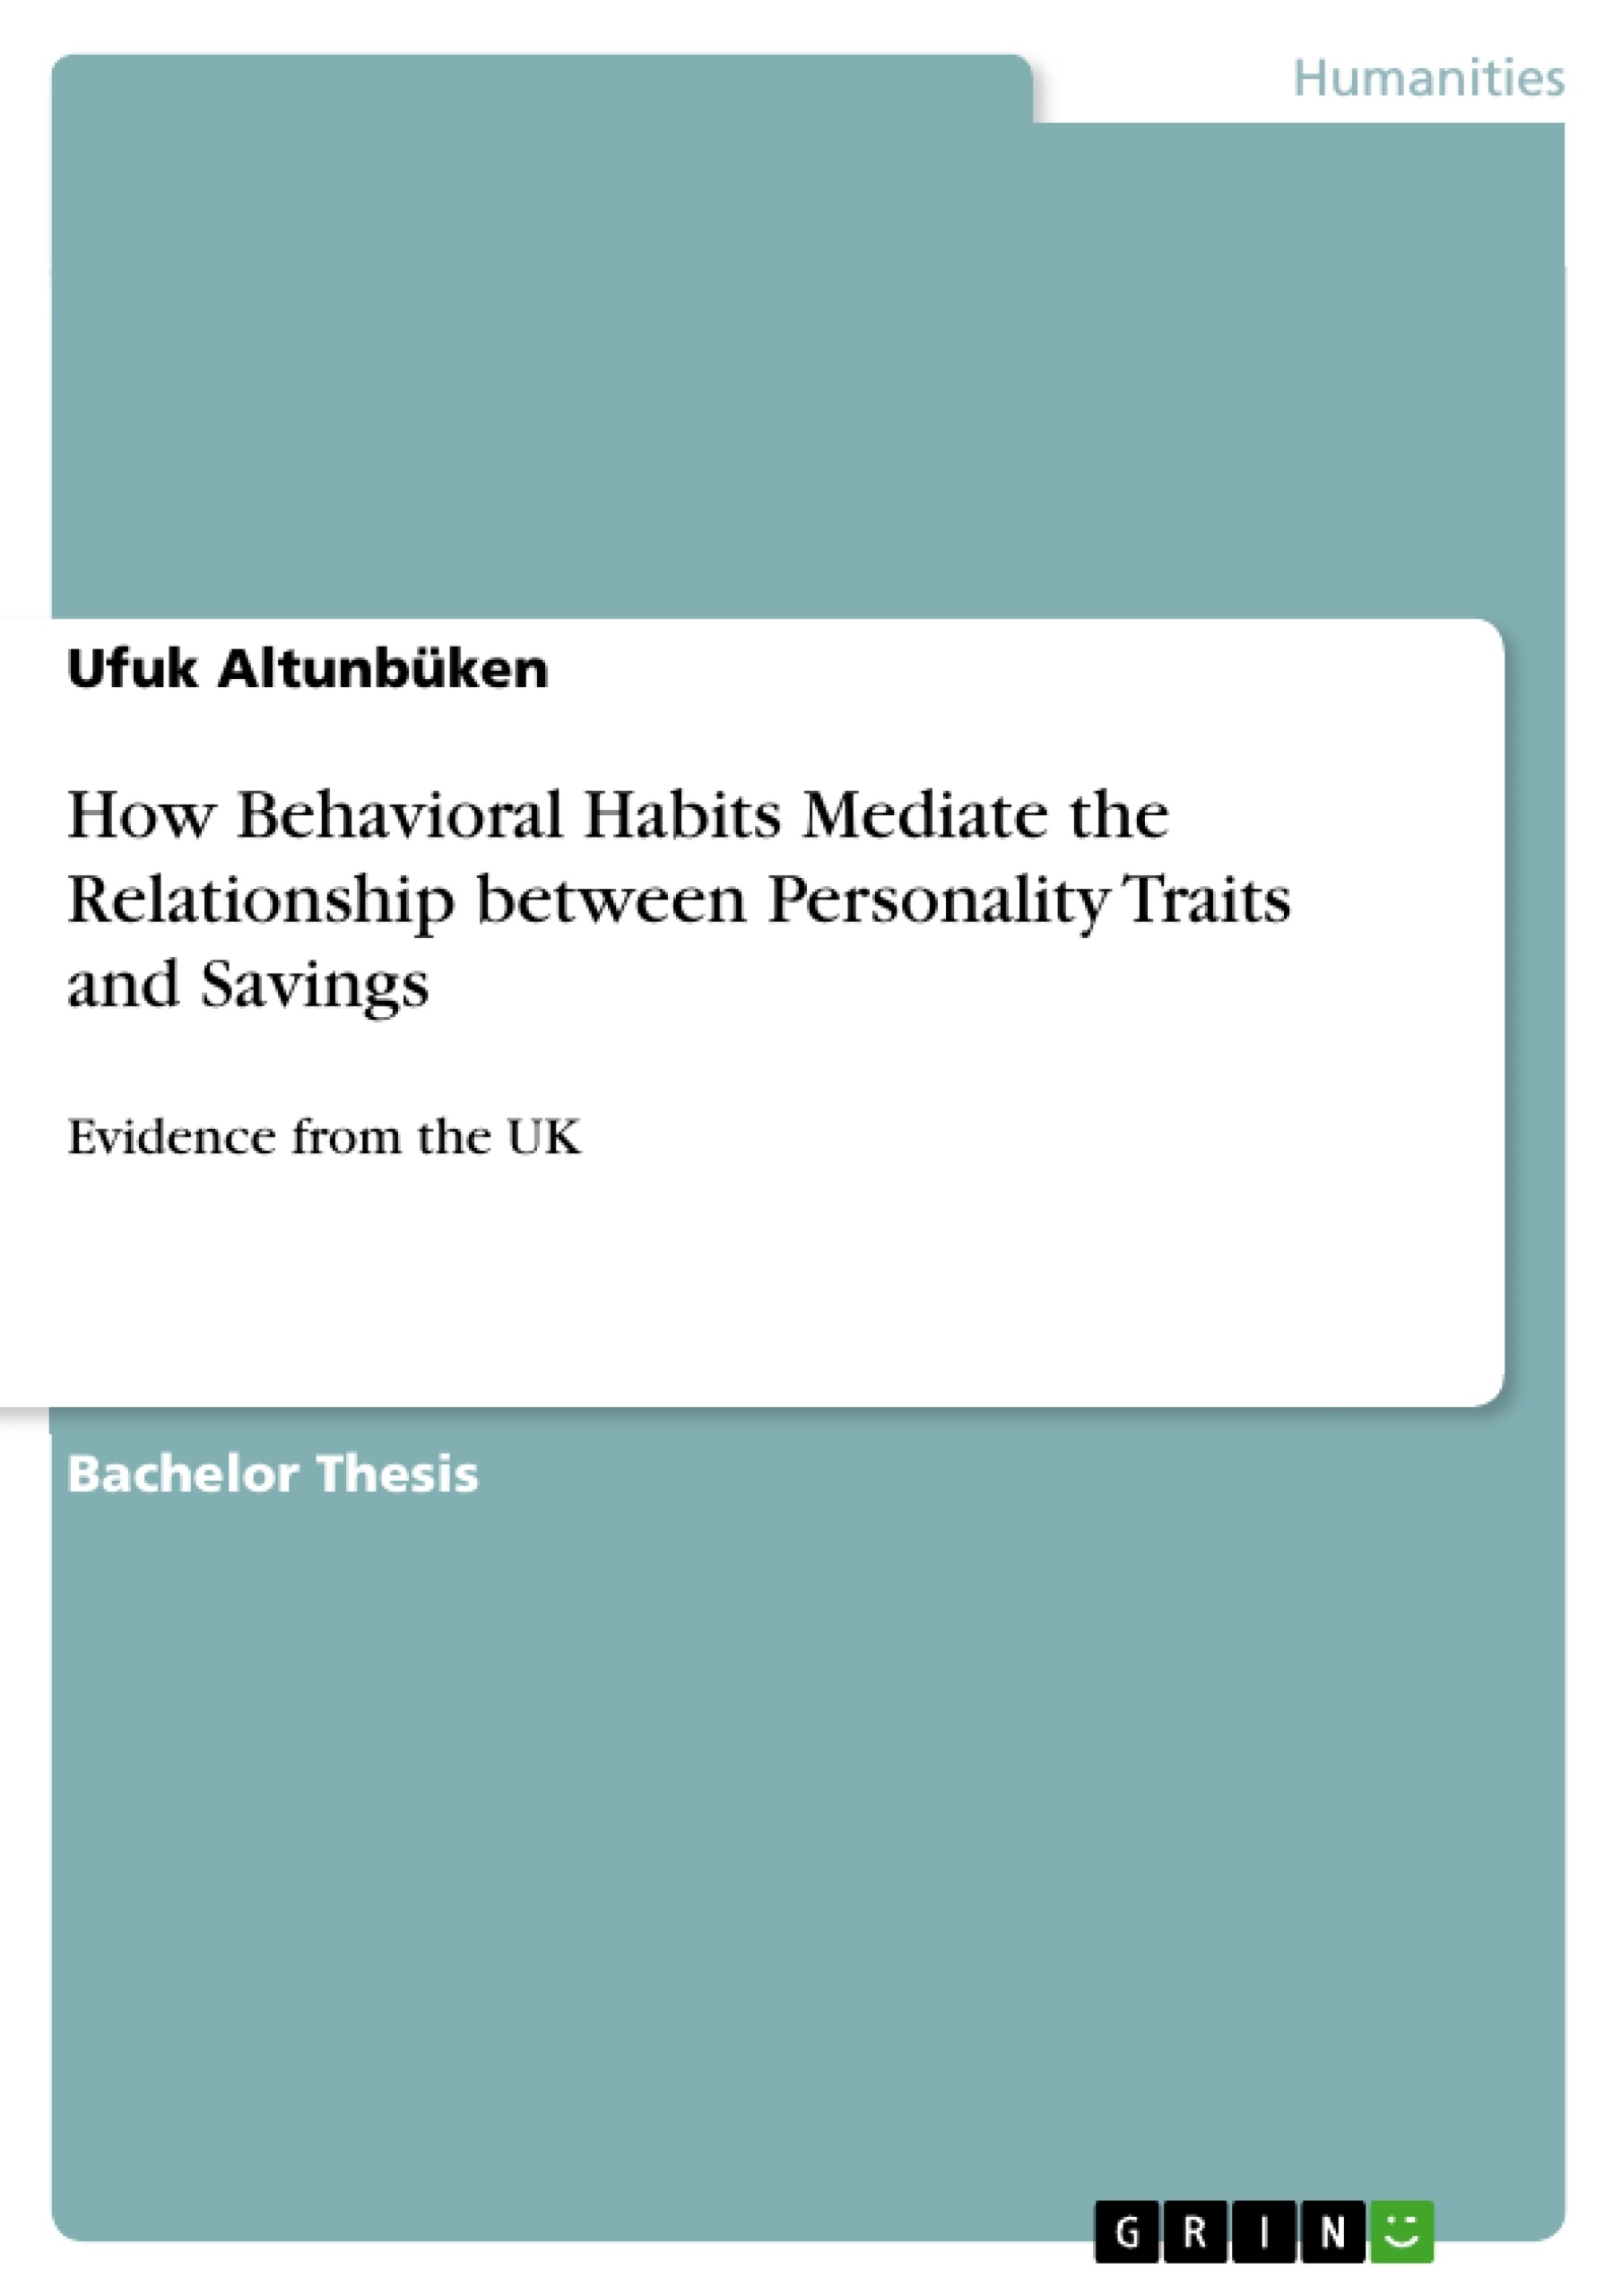 Title: How Behavioral Habits Mediate the Relationship between Personality Traits and Savings